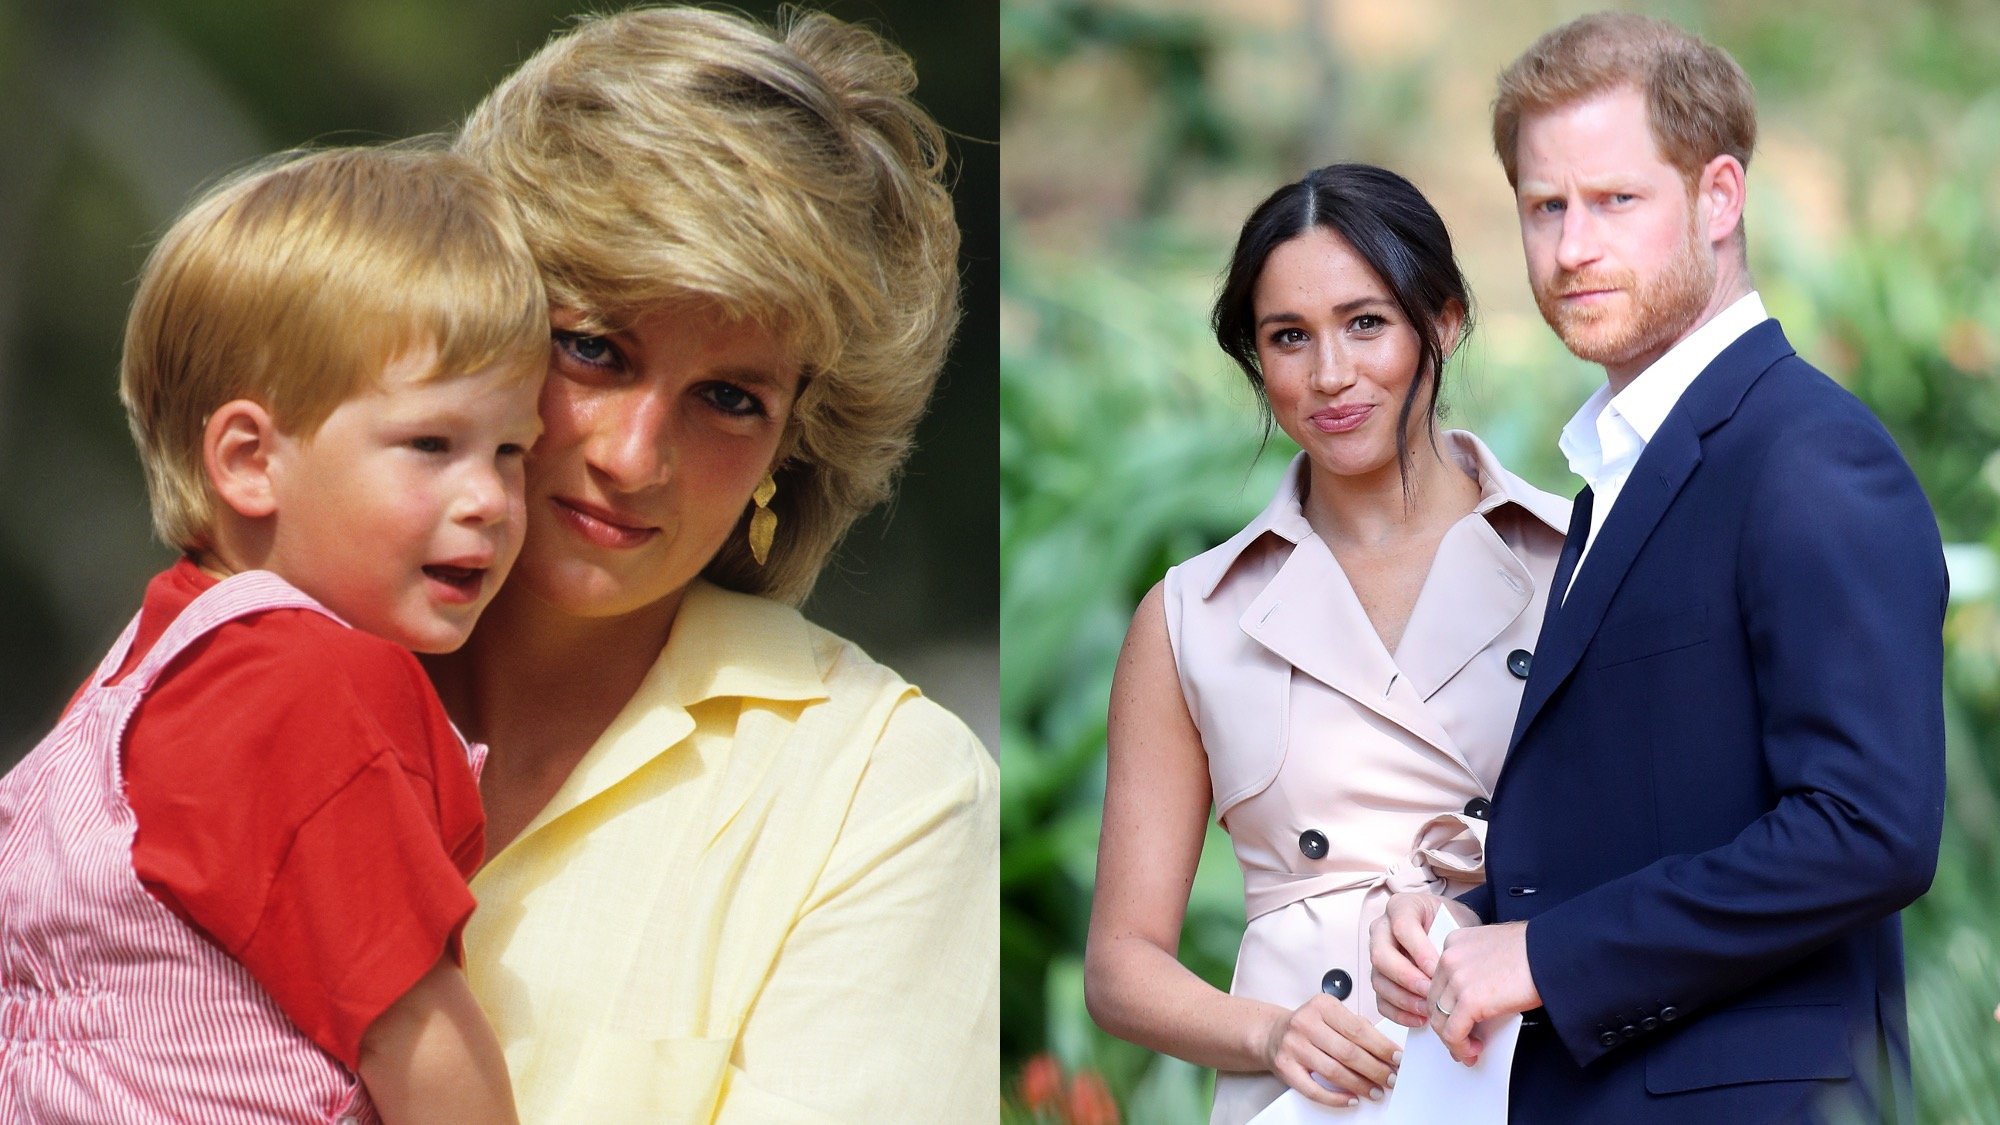 (L) Princess Diana with Prince Harry in 1987. (R) Prince Harry and Meghan Markle pictured in 2019.